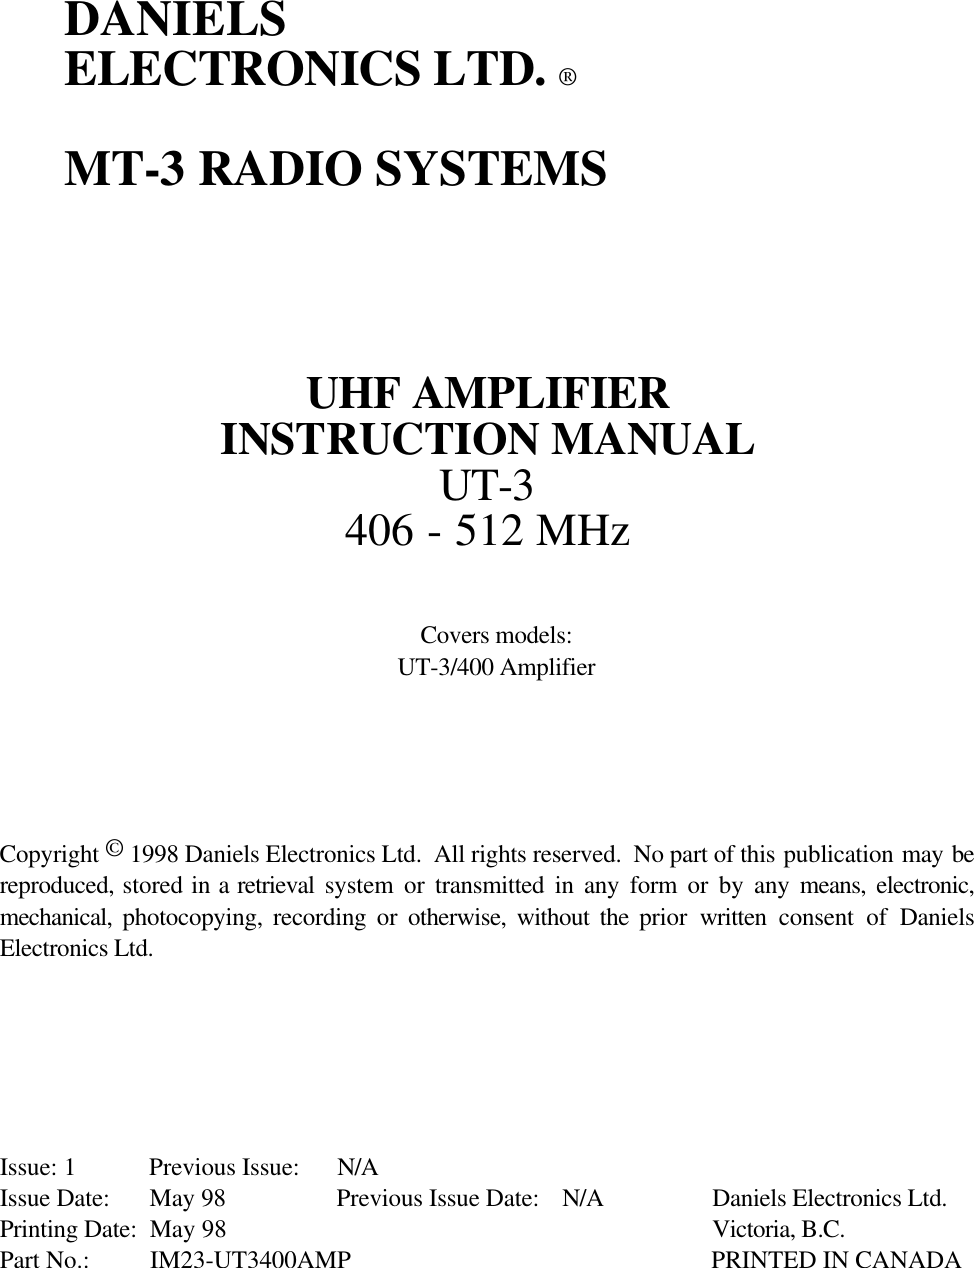 DANIELSELECTRONICS LTD. ®MT-3 RADIO SYSTEMSUHF AMPLIFIERINSTRUCTION MANUALUT-3406 - 512 MHzCovers models:UT-3/400 AmplifierCopyright © 1998 Daniels Electronics Ltd.  All rights reserved.  No part of this publication may bereproduced, stored in a retrieval  system or transmitted in any form or by any means, electronic,mechanical,  photocopying, recording or otherwise, without the prior  written consent of DanielsElectronics Ltd.Issue: 1 Previous Issue: N/AIssue Date: May 98 Previous Issue Date: N/A Daniels Electronics Ltd.Printing Date: May 98 Victoria, B.C.Part No.: IM23-UT3400AMP PRINTED IN CANADA